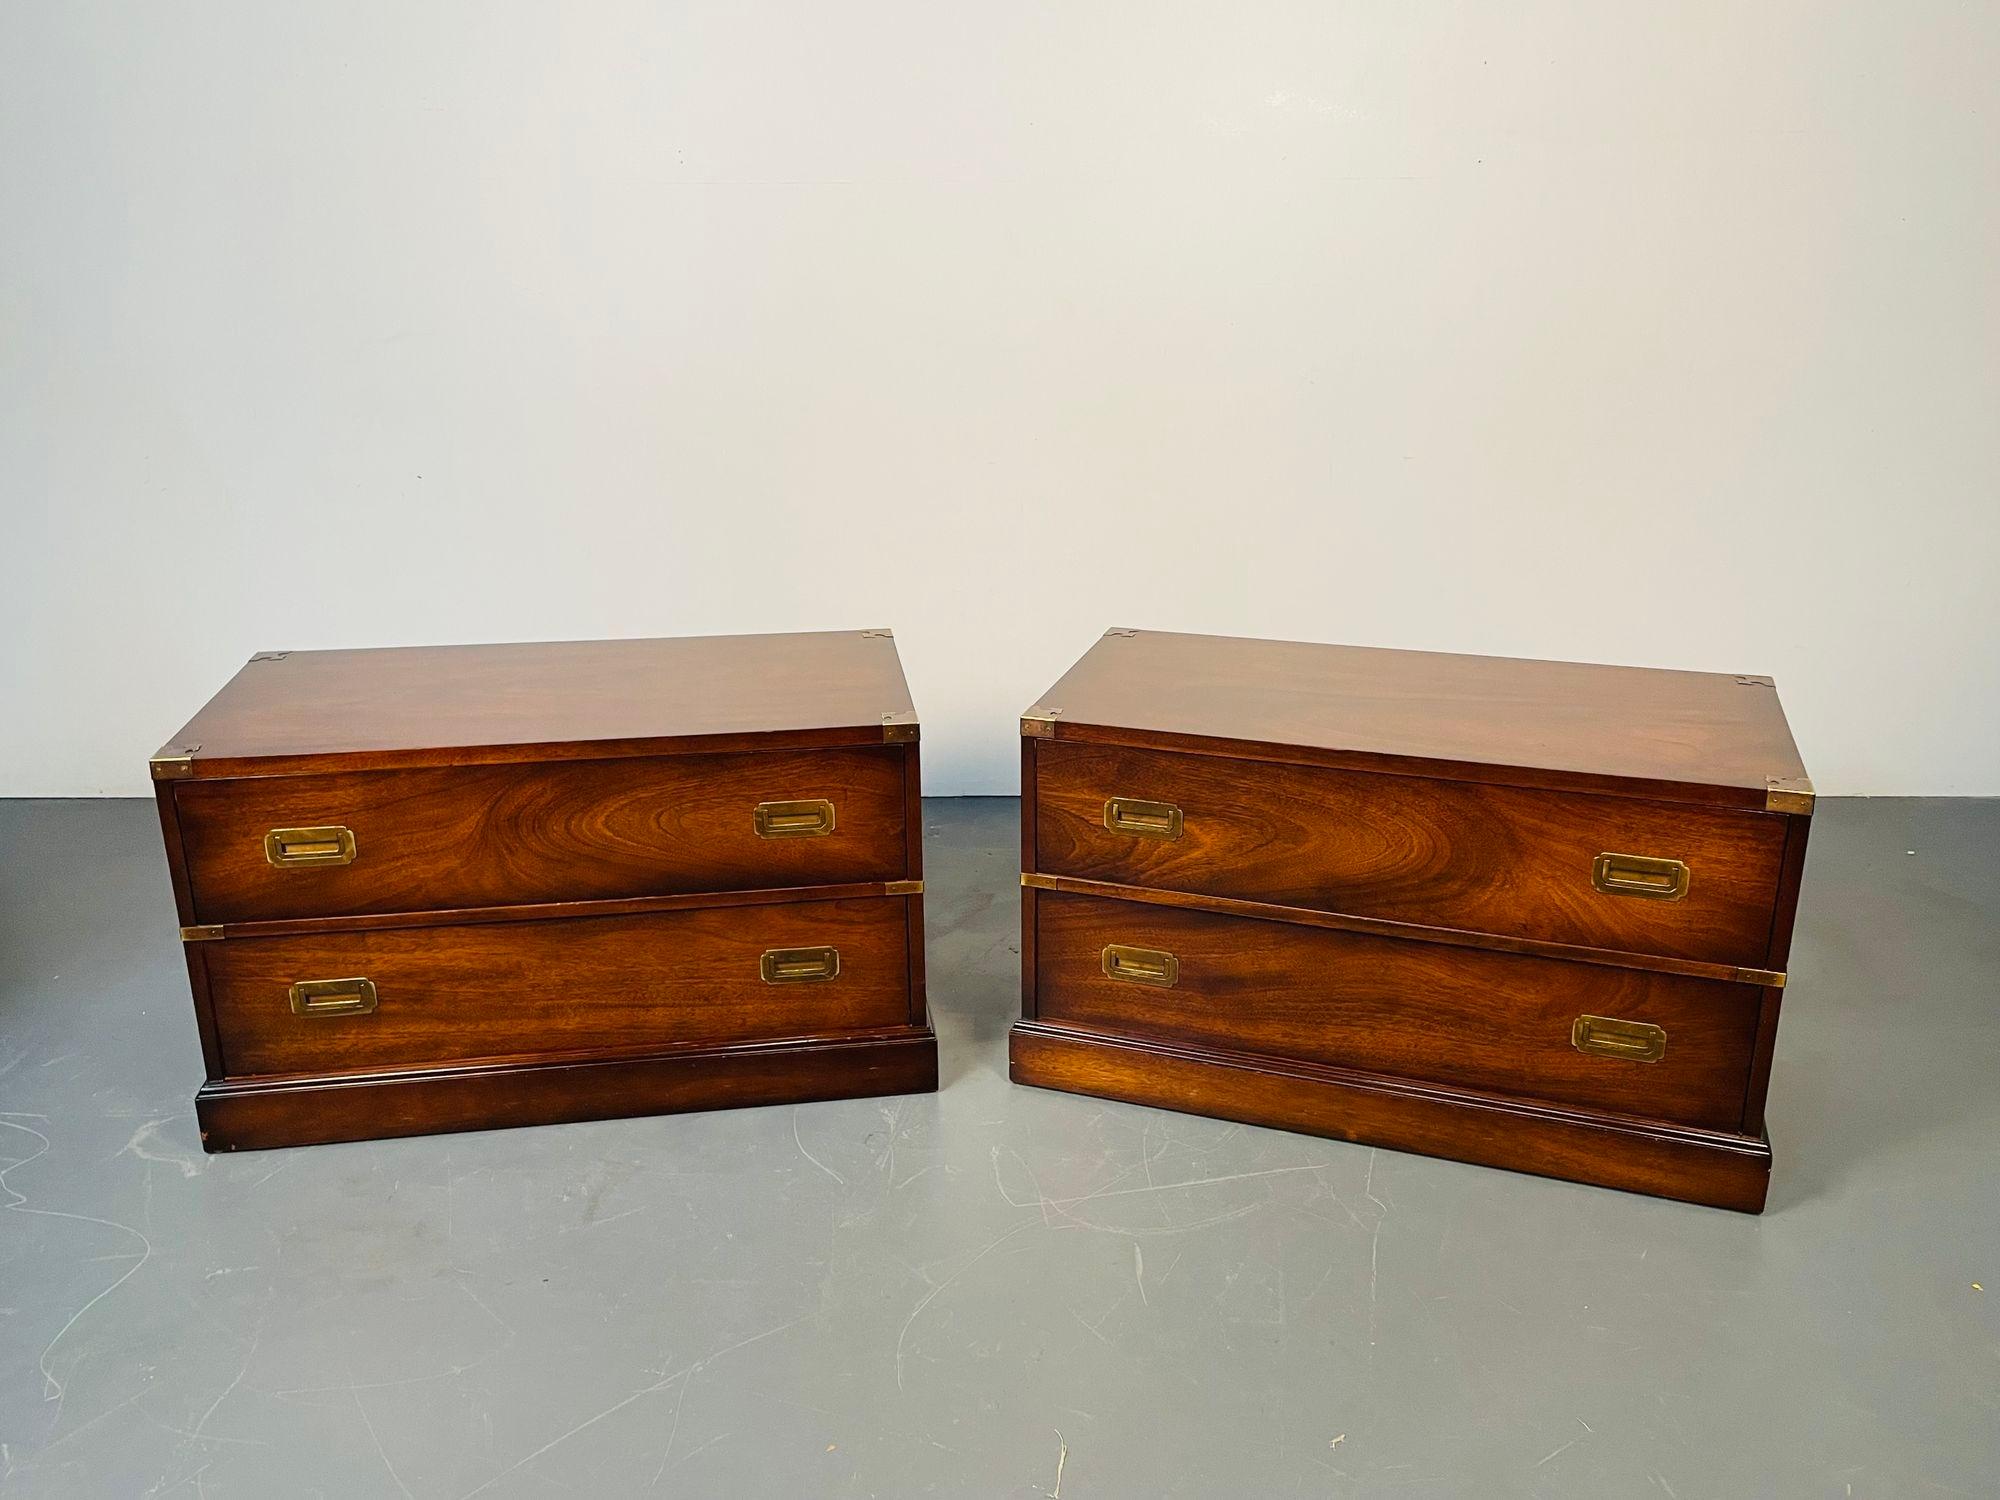 Pair of campaign low chests / nightstands, Baker Furniture Company
Flame mahogany Mid-Century Modern chests or bedside tables in the Campaign Fashion. Each having two drawers with sunken brass handles and brass carry handles on the sides. The pair